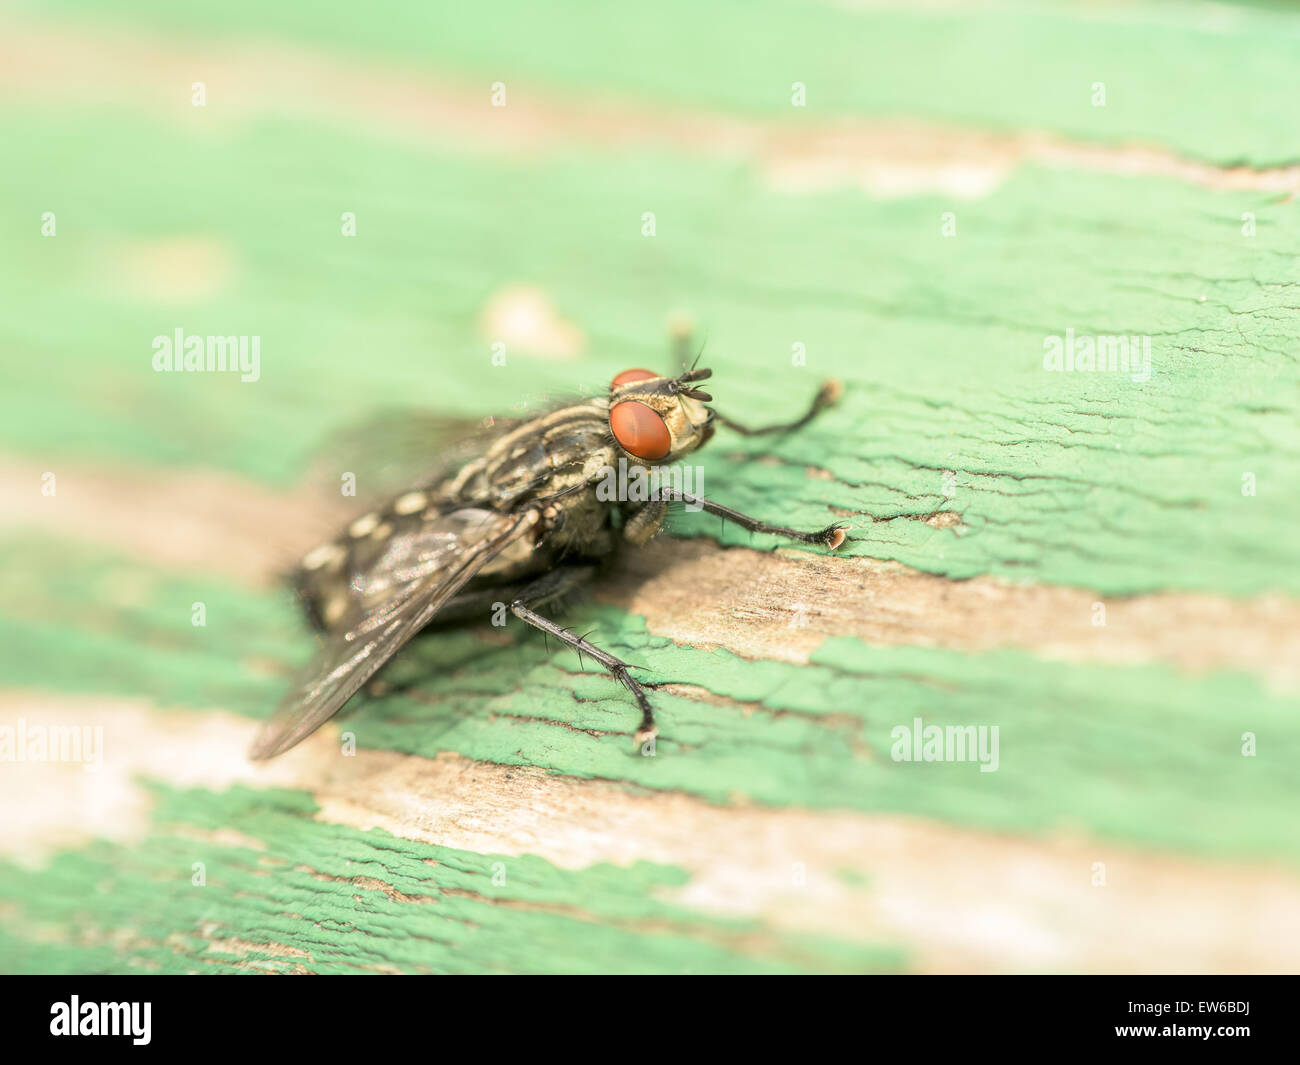 Common House Fly (Musca Domestica) Macro On Green Wood Stock Photo